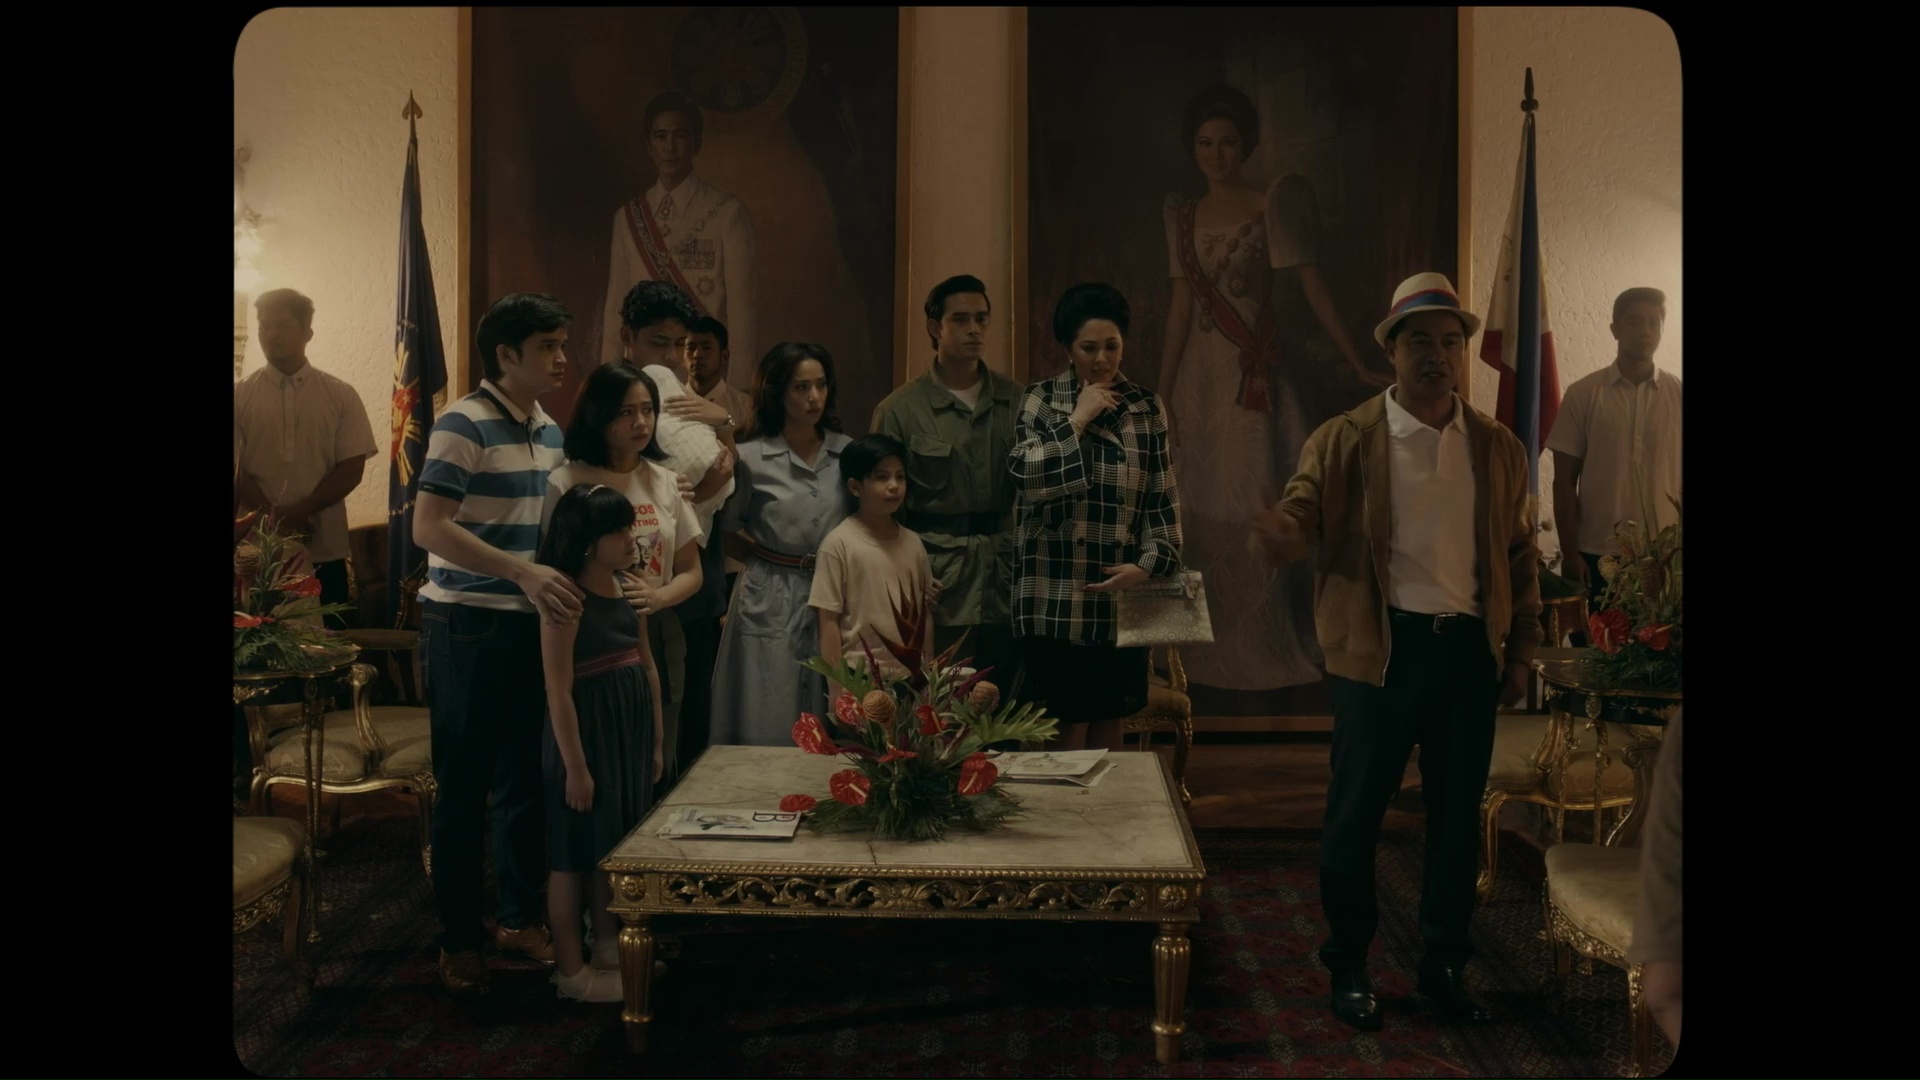 Good Ol’ Review: Despite Its Polarizing Existence, “Maid in Malacañang” a Familiar, Run of the Mill Filipino Drama